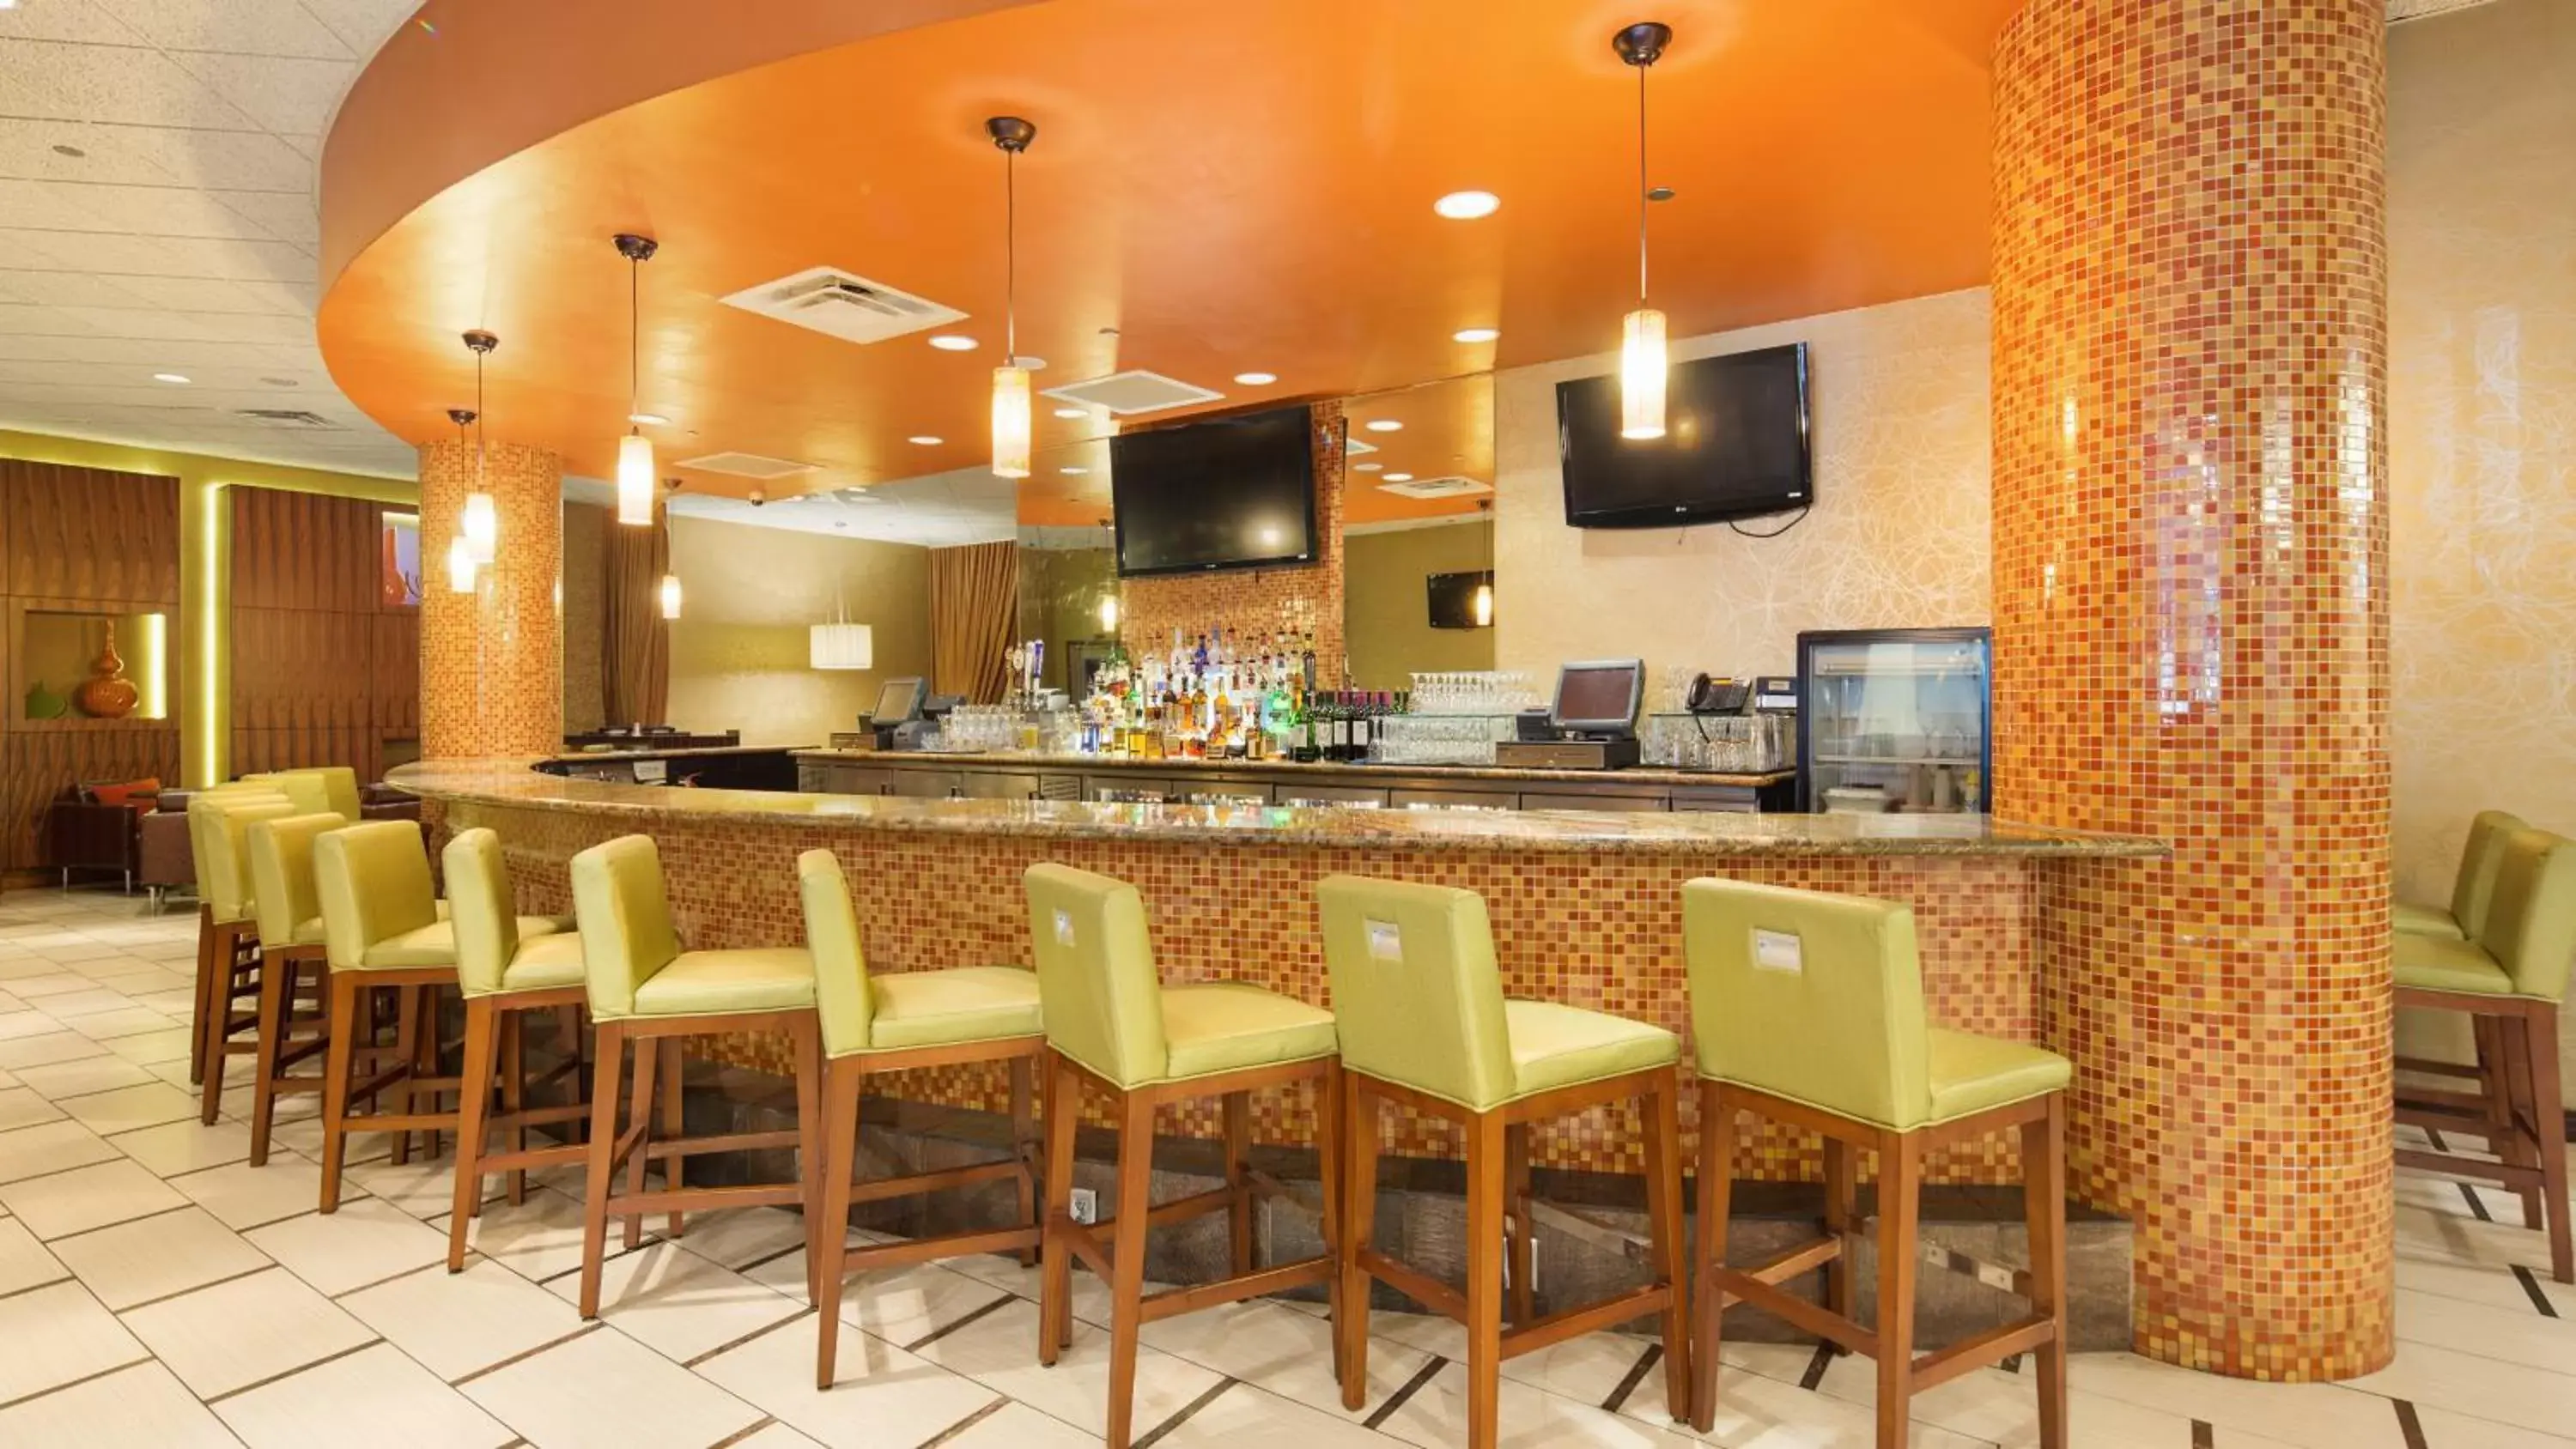 Lounge/Bar in The Florida Hotel & Conference Center in the Florida Mall